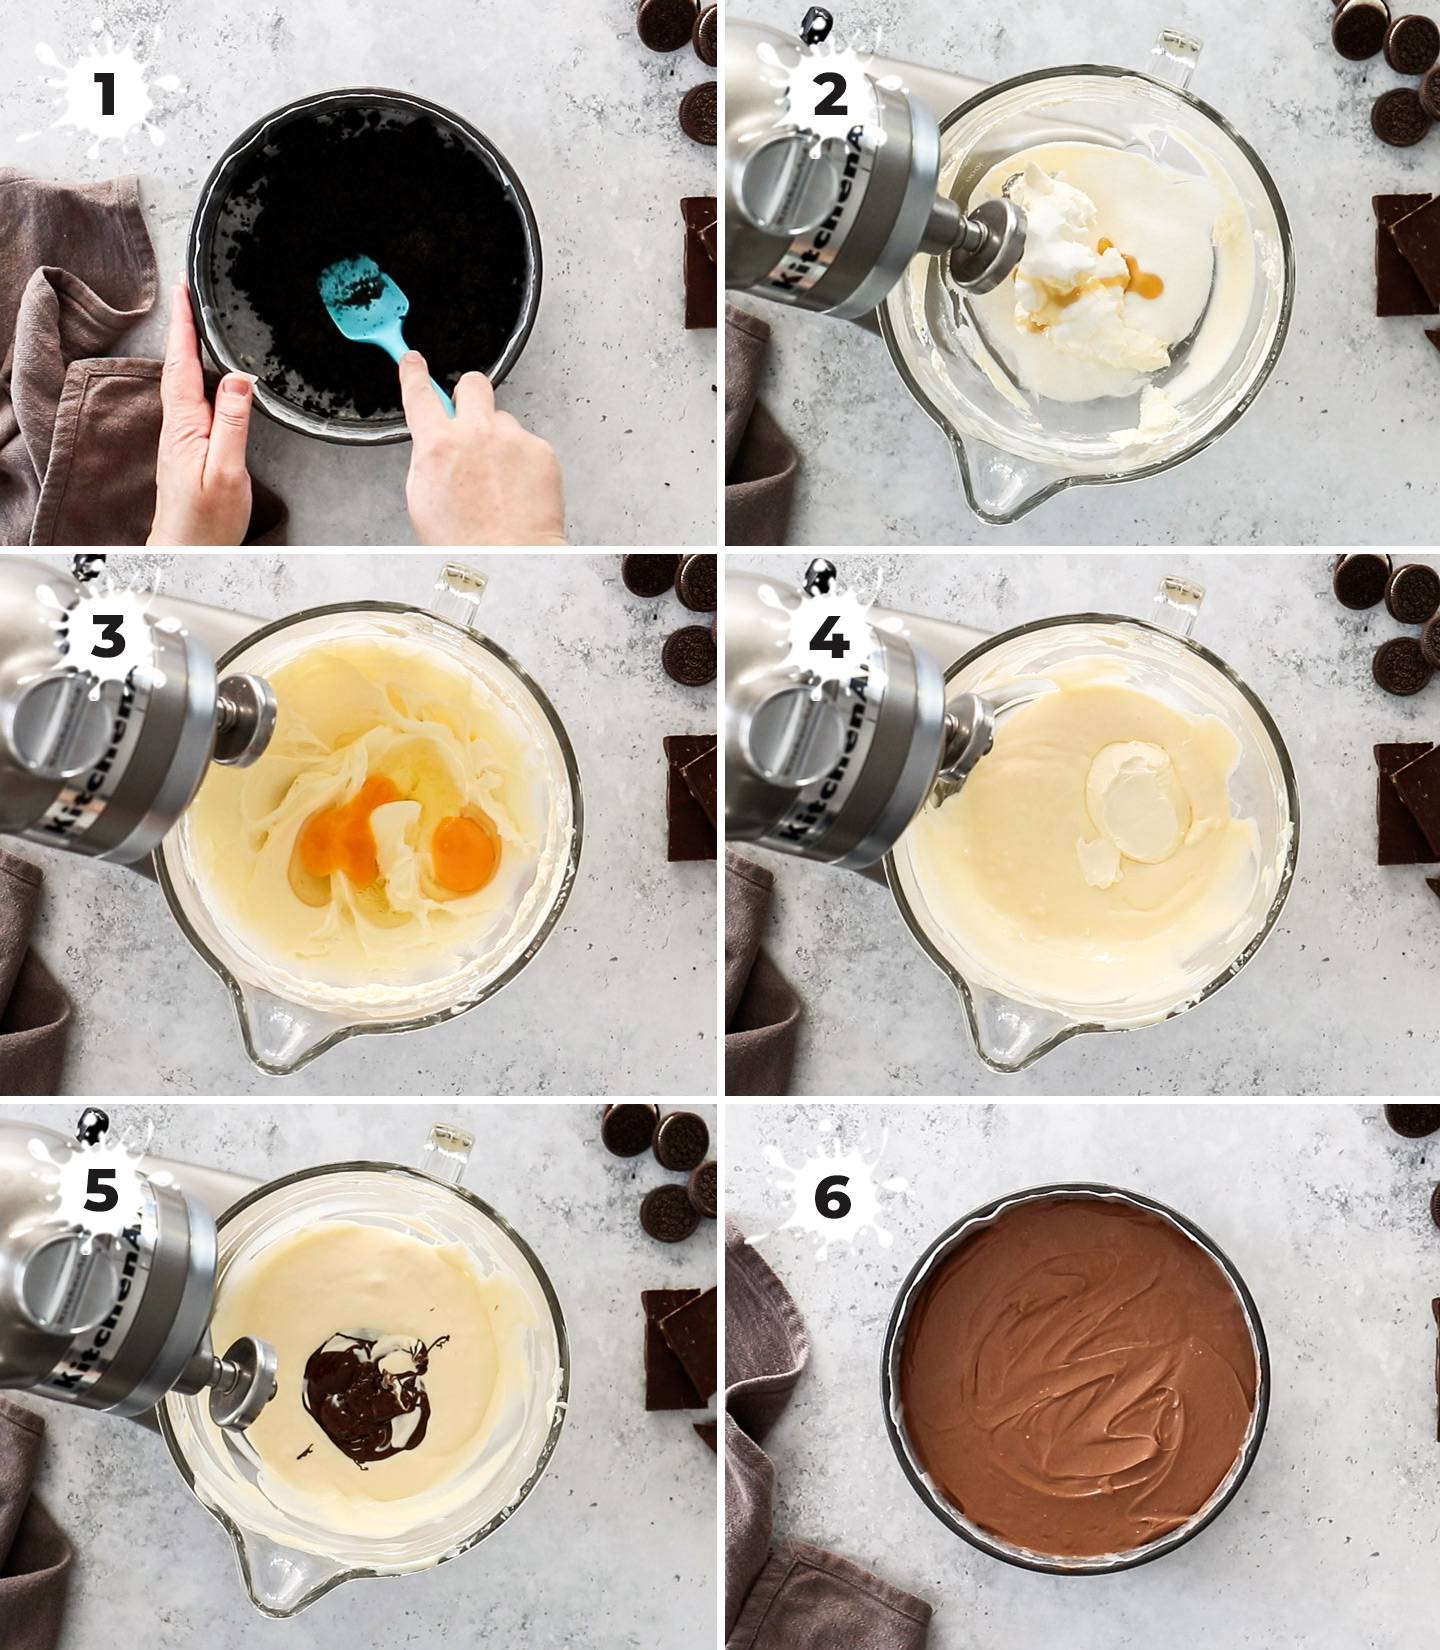 A collage showing how to make and assemble a chocolate cheesecake.